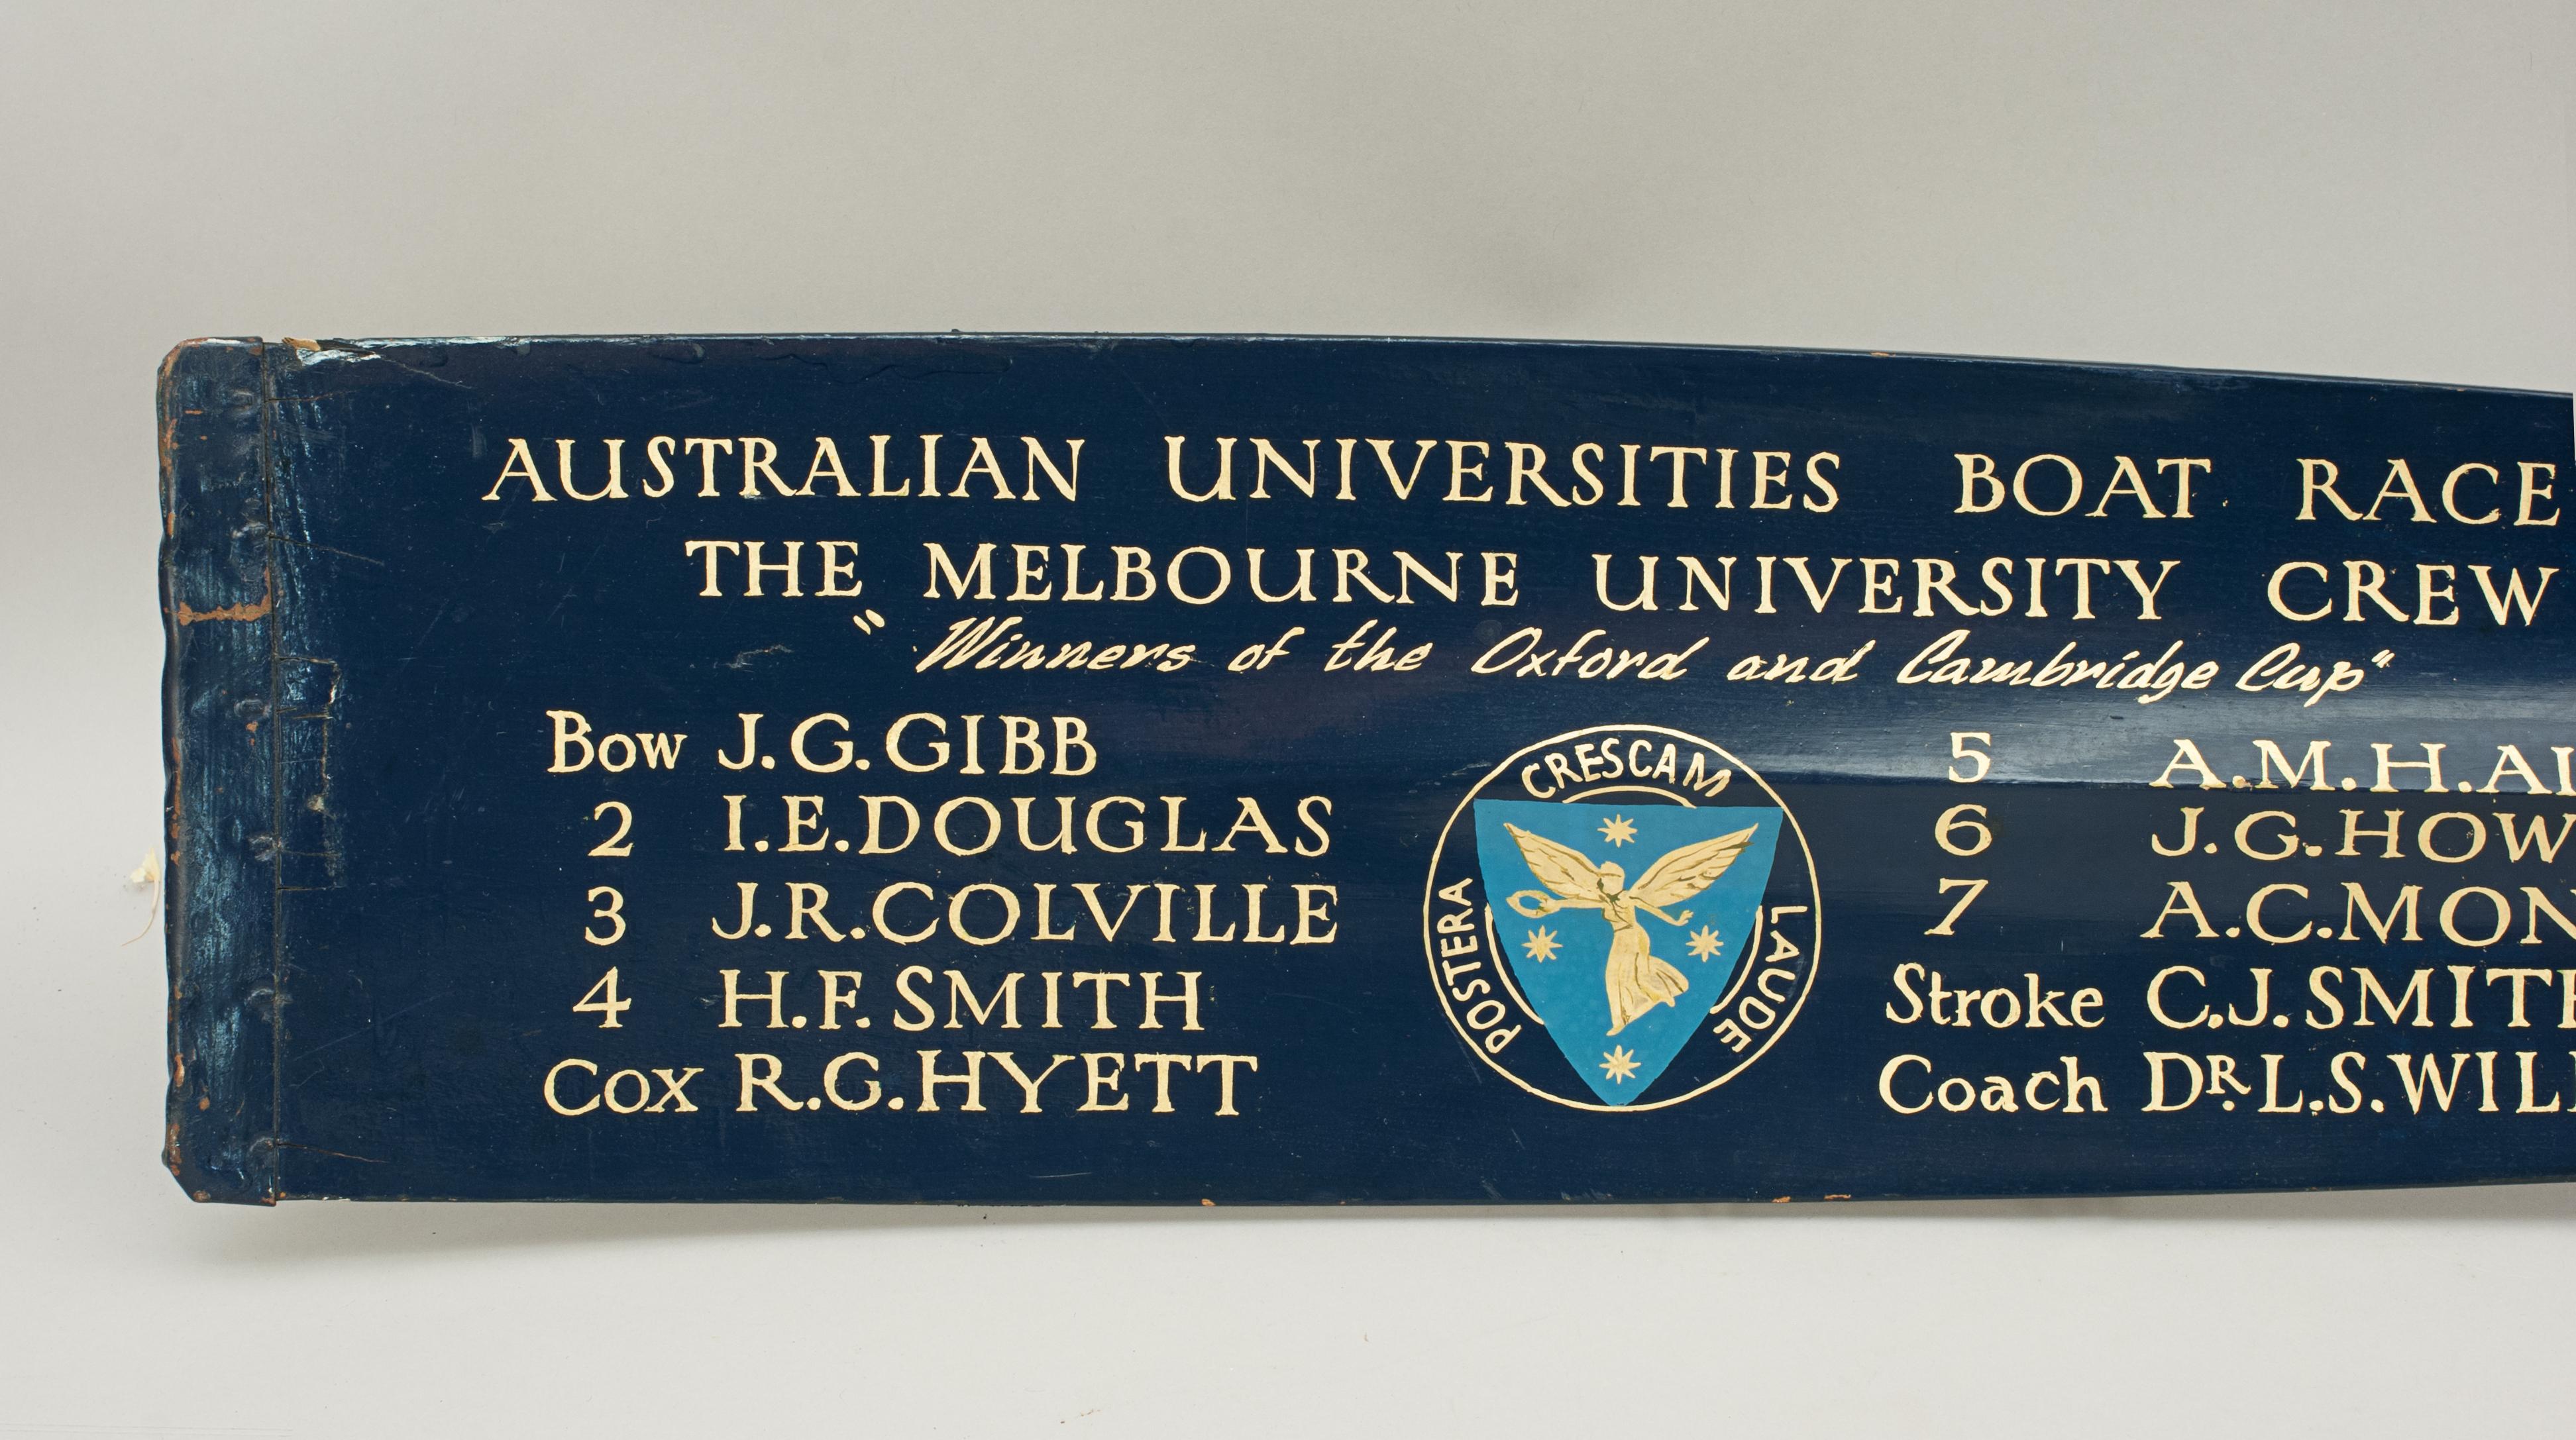 1955 Australian University Regatta Presentation Oar, Trophy Blade.
This oar blade tip is an original traditional Melbourne University presentation rowing oar tip with calligraphy and The Melbourne University insignia. The paint and writing on the